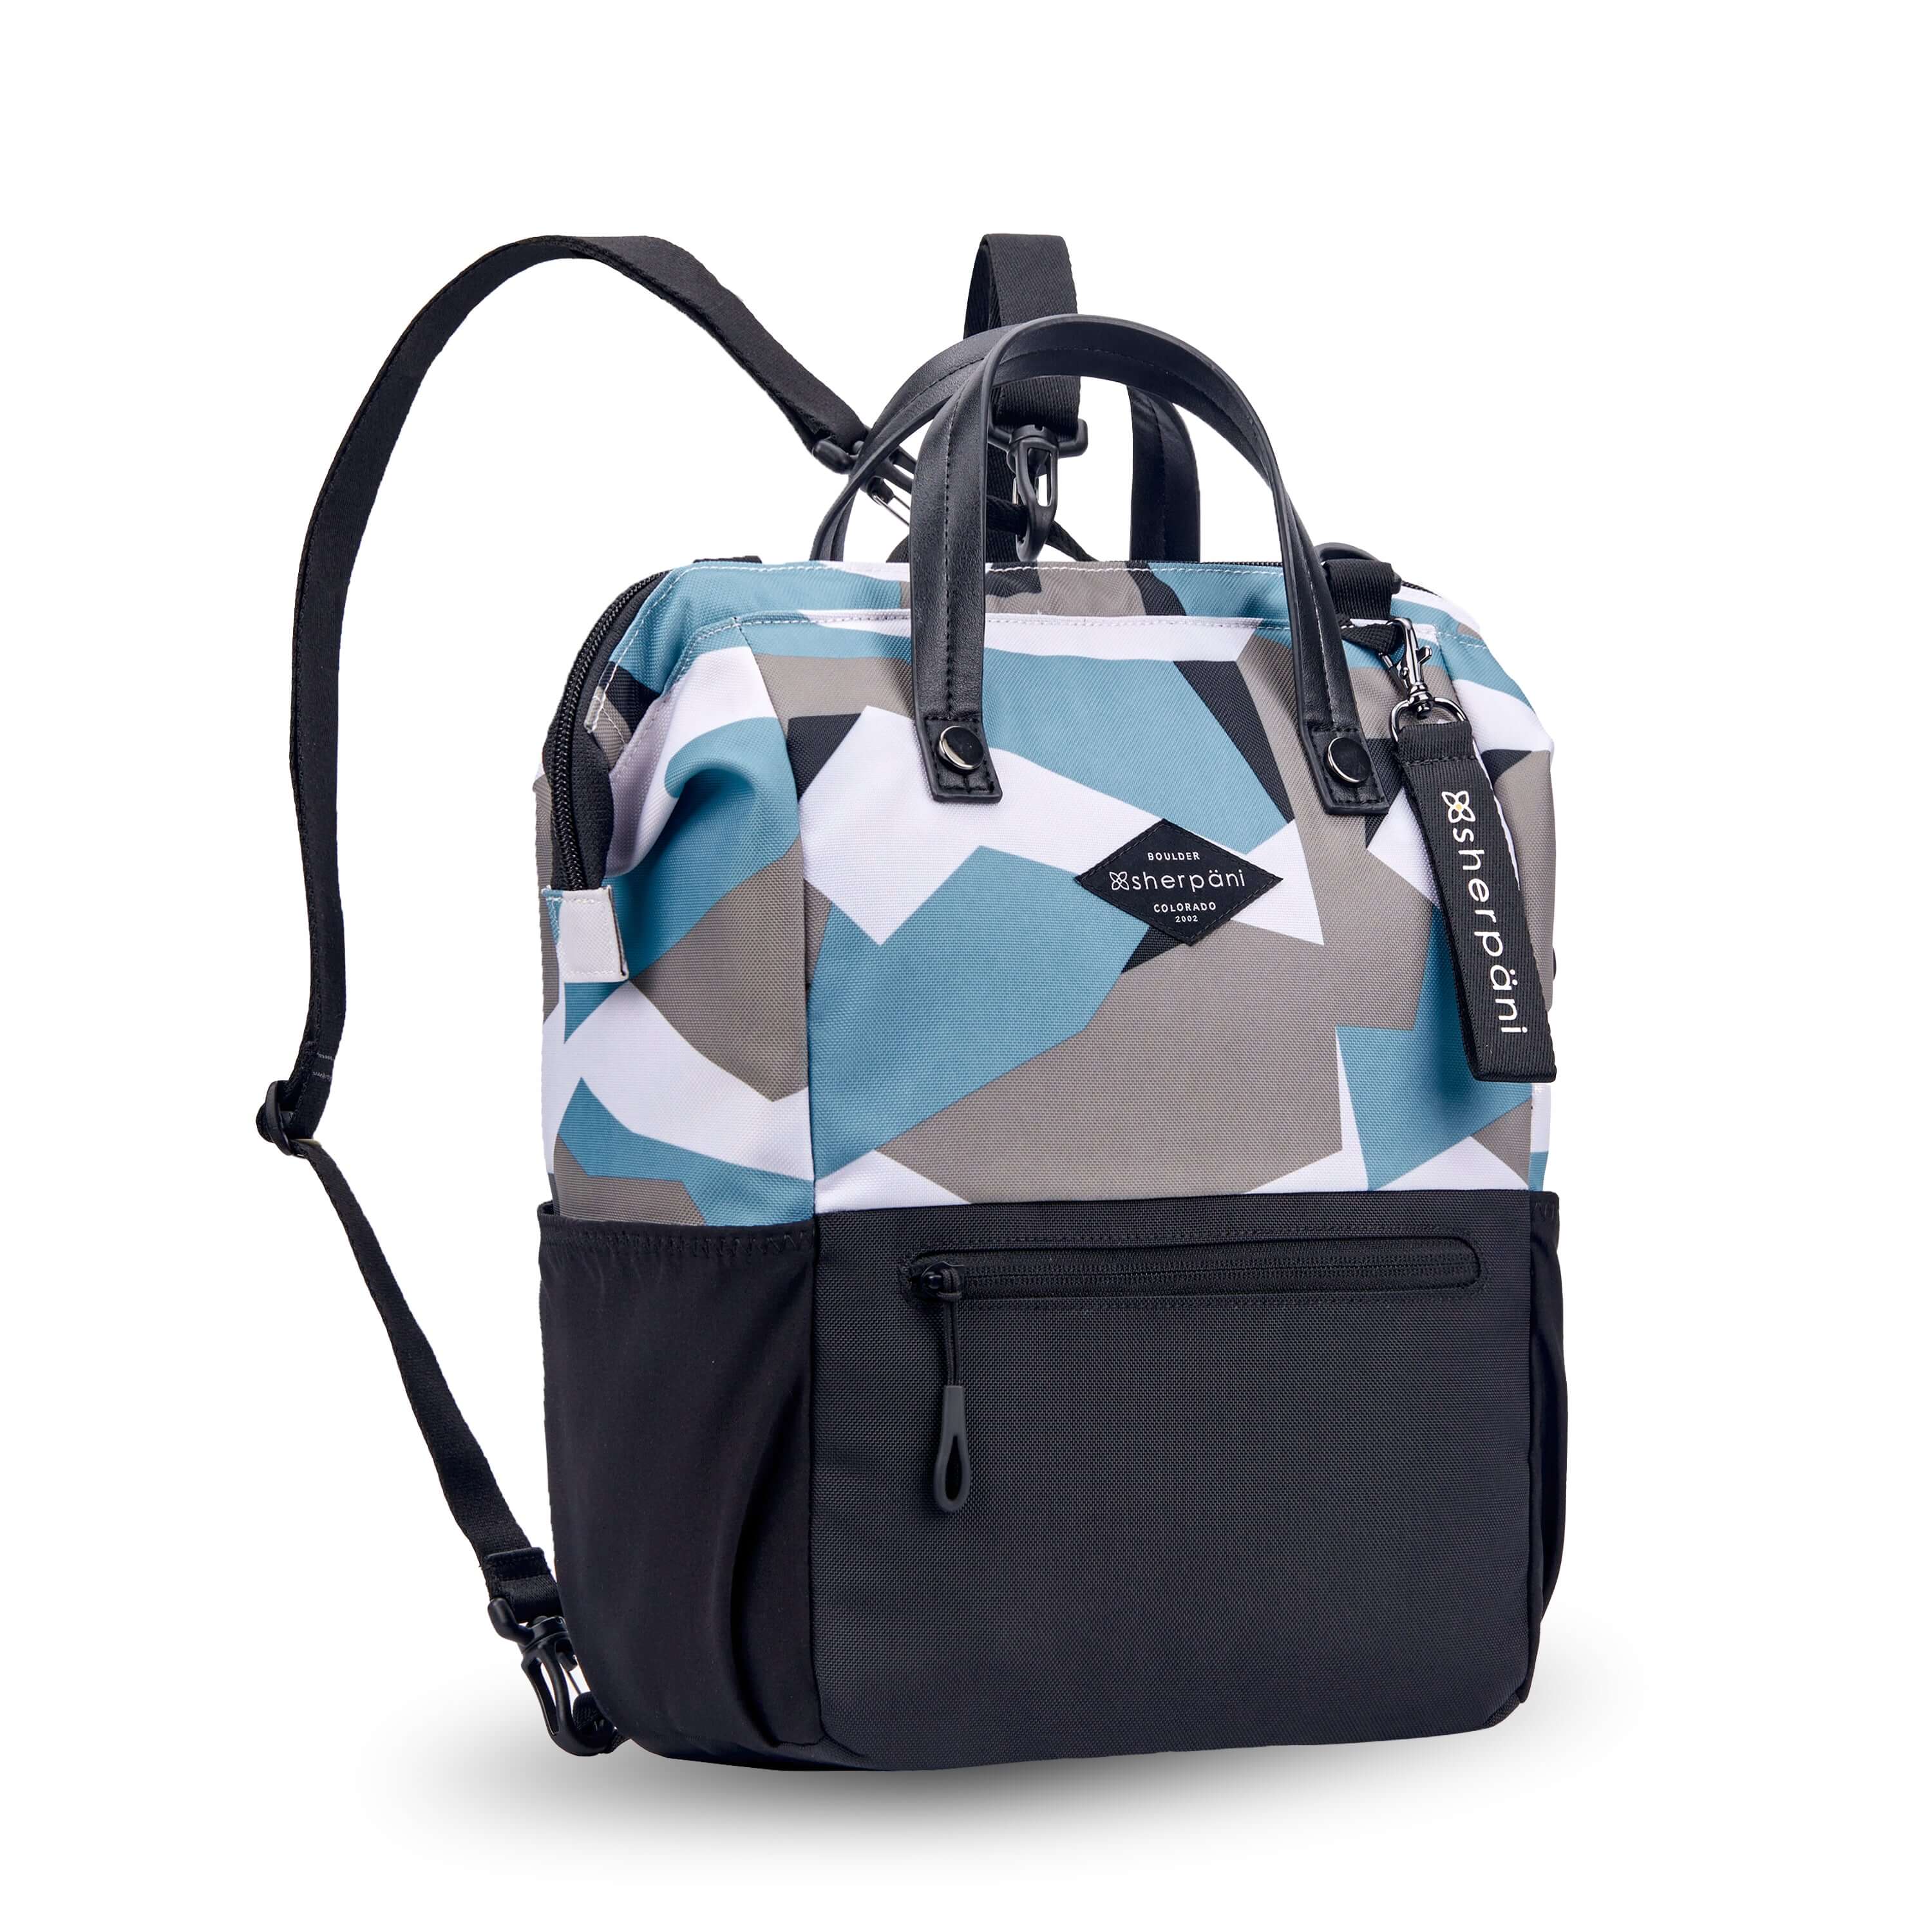 Angled front view of Sherpani three in one bag, the Dispatch in Summer Camo. The bag is two toned: the top is a camouflage pattern of light blue, gray and white, the bottom is black. There is an external zipper pocket on the front panel. Easy pull zippers are accented in black. A branded Sherpani keychain is clipped to the upper right corner. Water bottle holders sit on either side of the bag. It has short tote handles and adjustable straps that can function for a backpack or crossbody. #color_summer camo